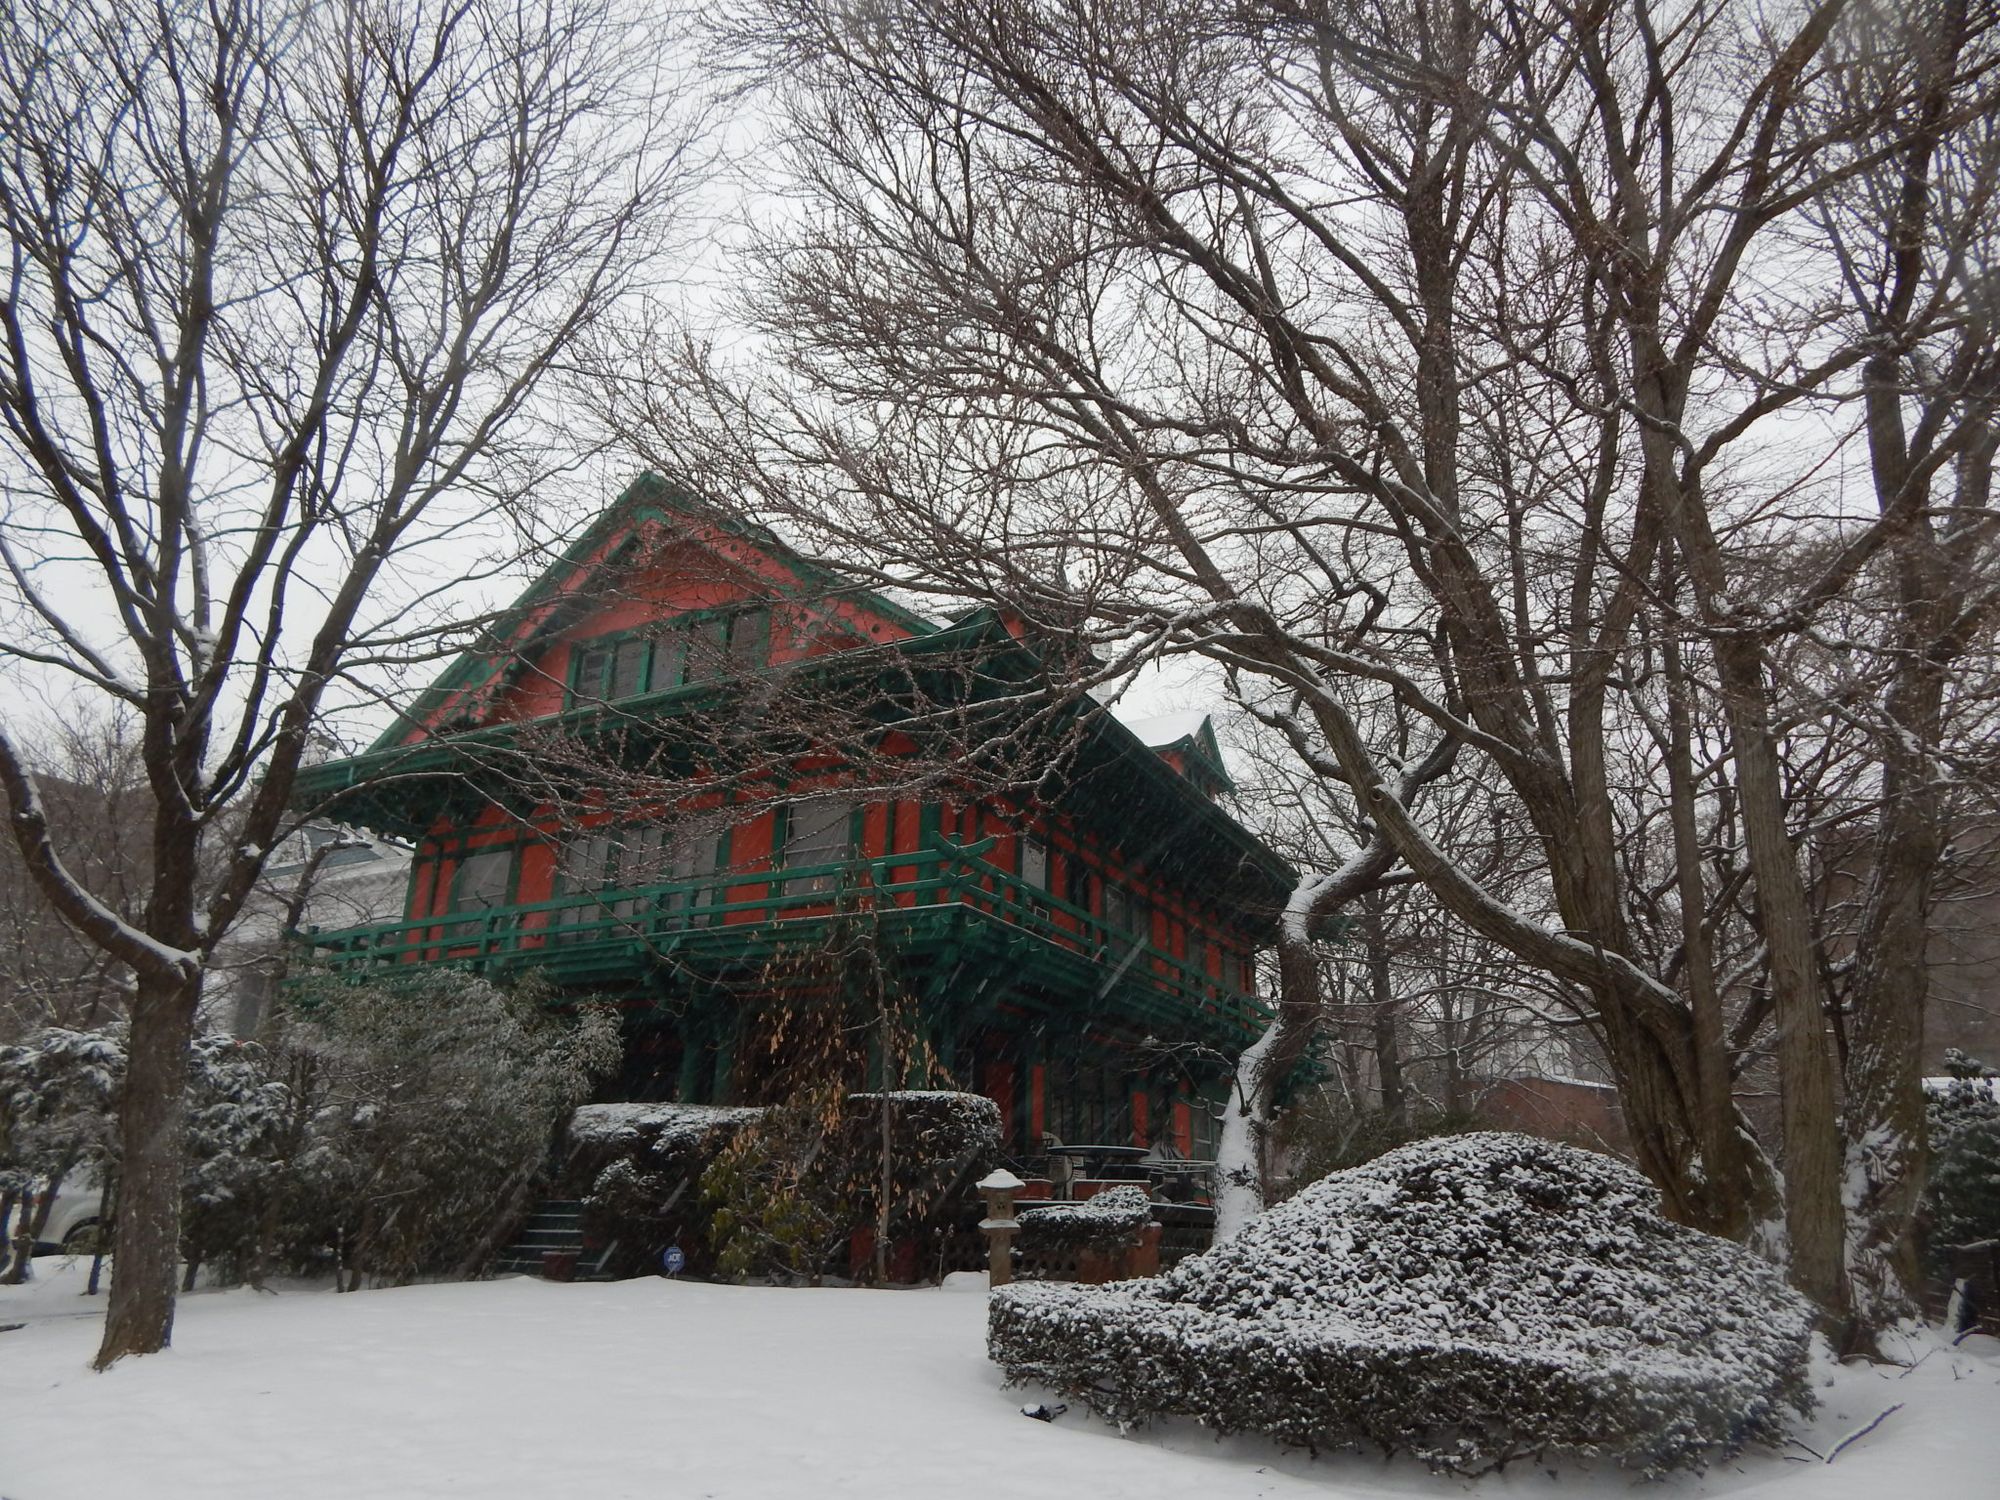 The Japanese House: Bringing Color To Our Winter